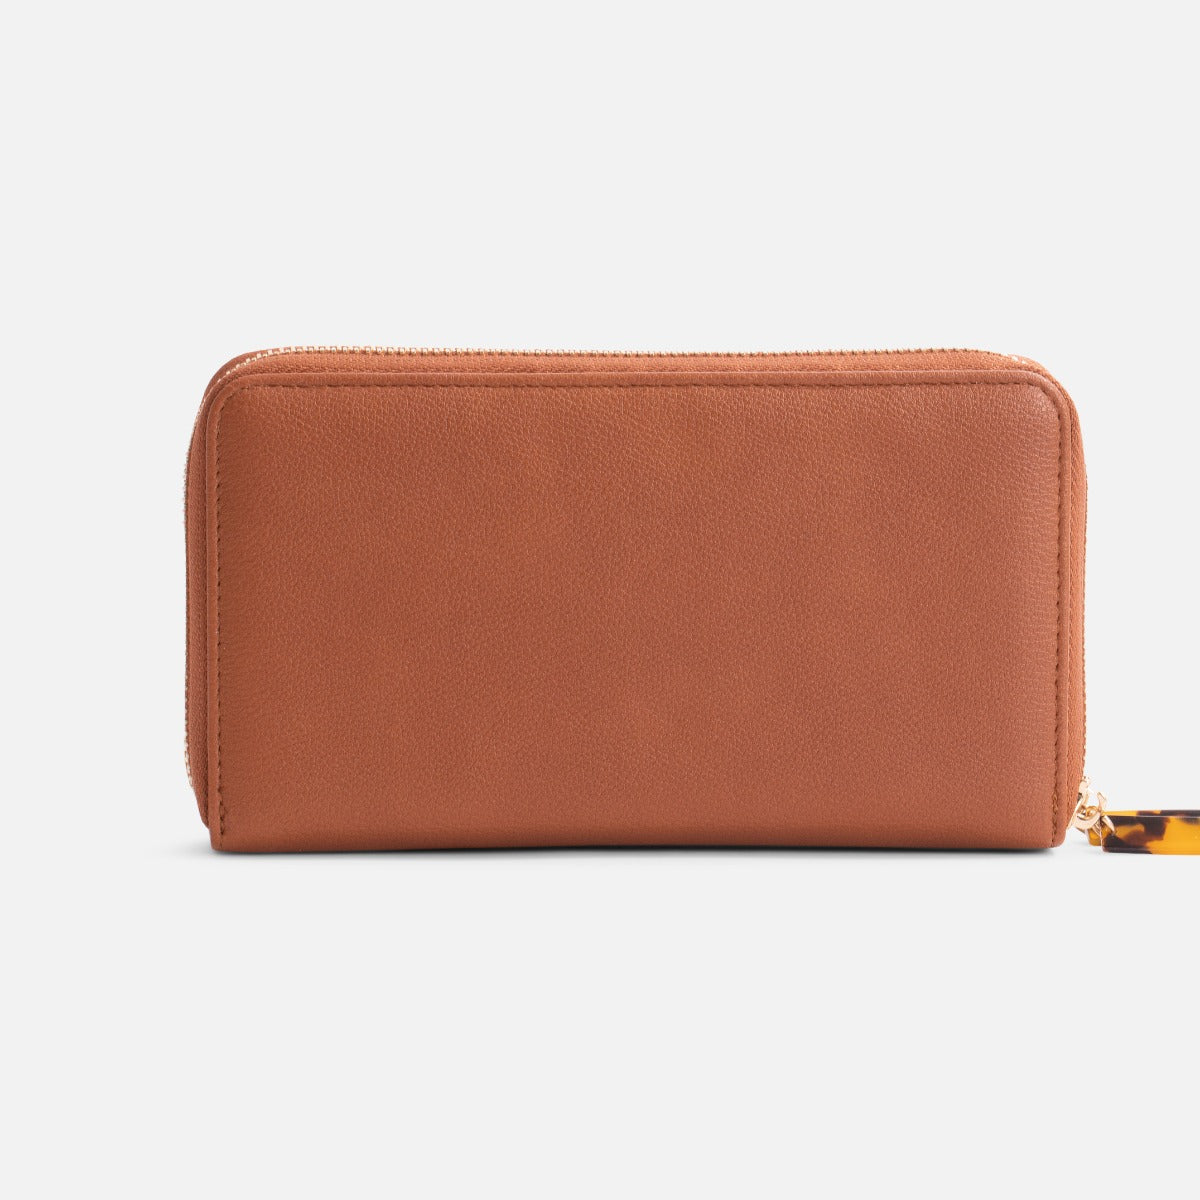 Double cognac wallet with tortoiseshell ornaments